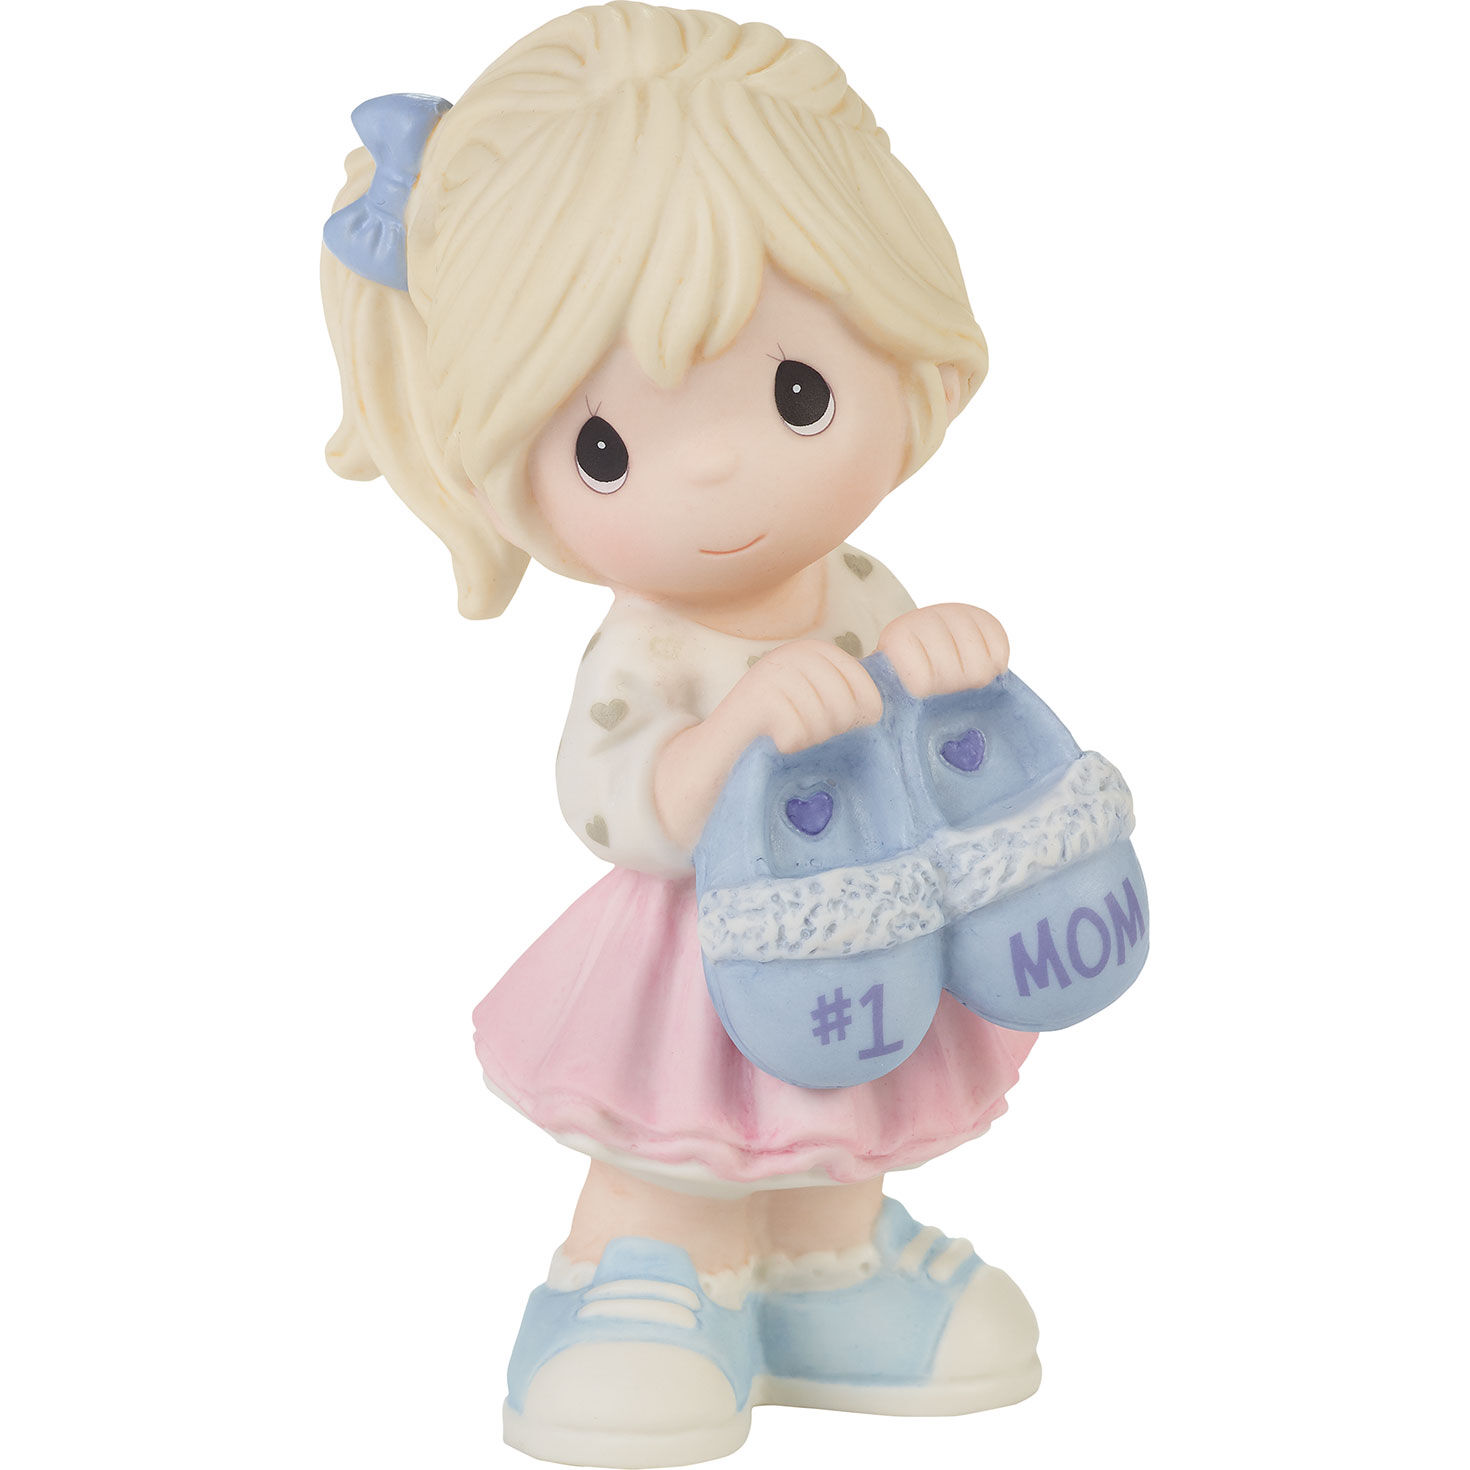 Precious Moments Girl With #1 Mom Slippers Figurine, 4.8" for only USD 36.99 | Hallmark